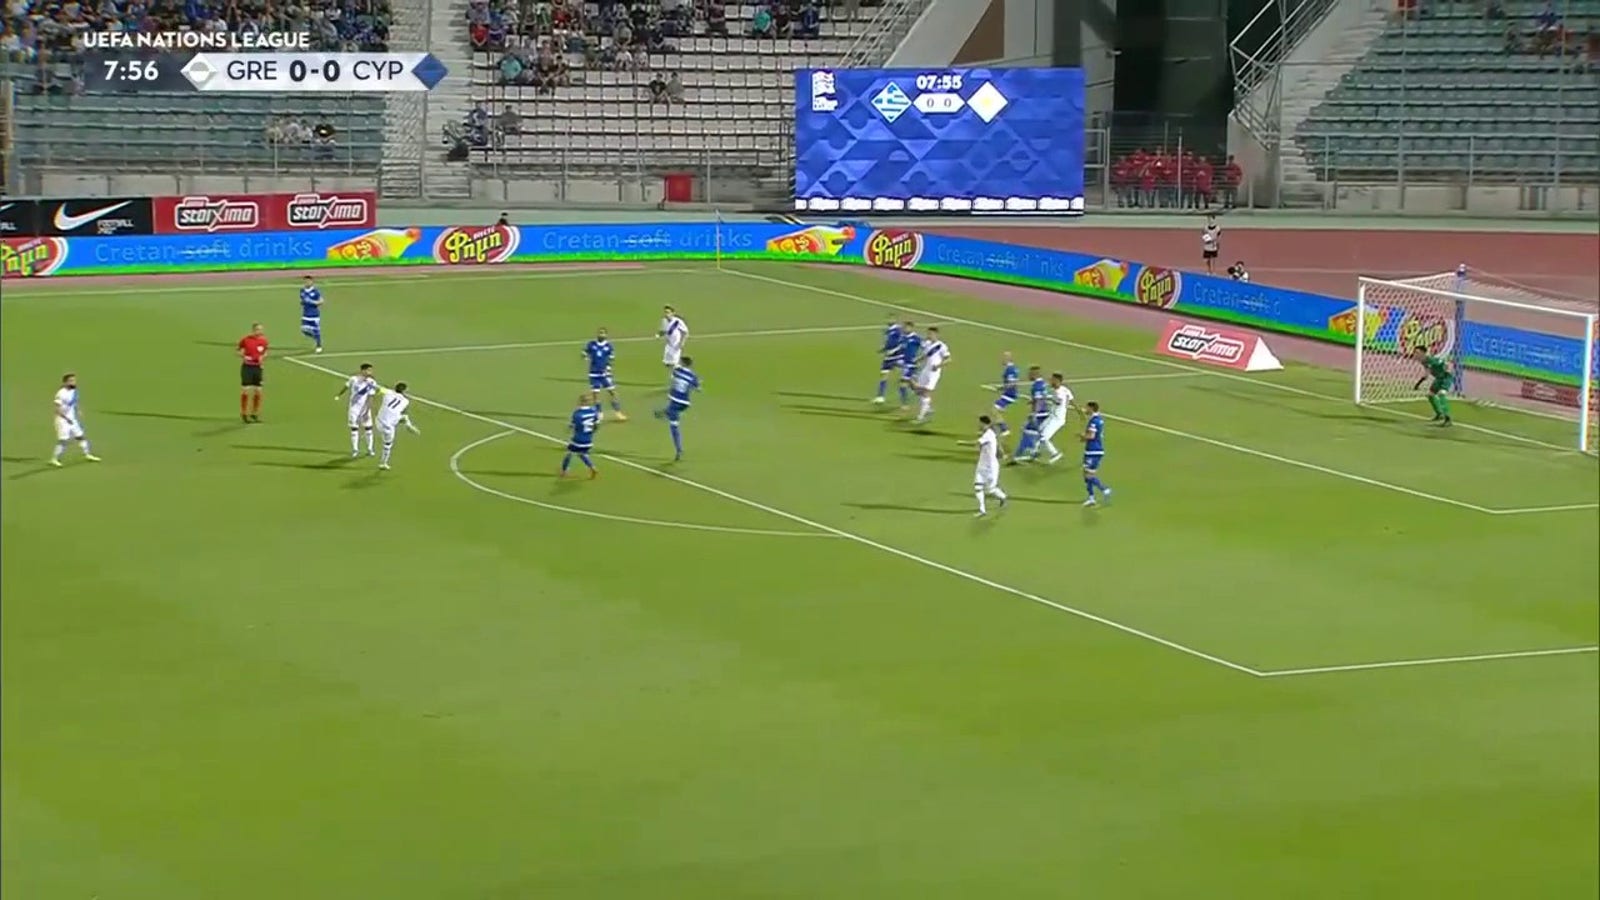 Greece's Anastasios Bakasetas blasts an outrageous outside-the-box volley against Cyprus, 1-0